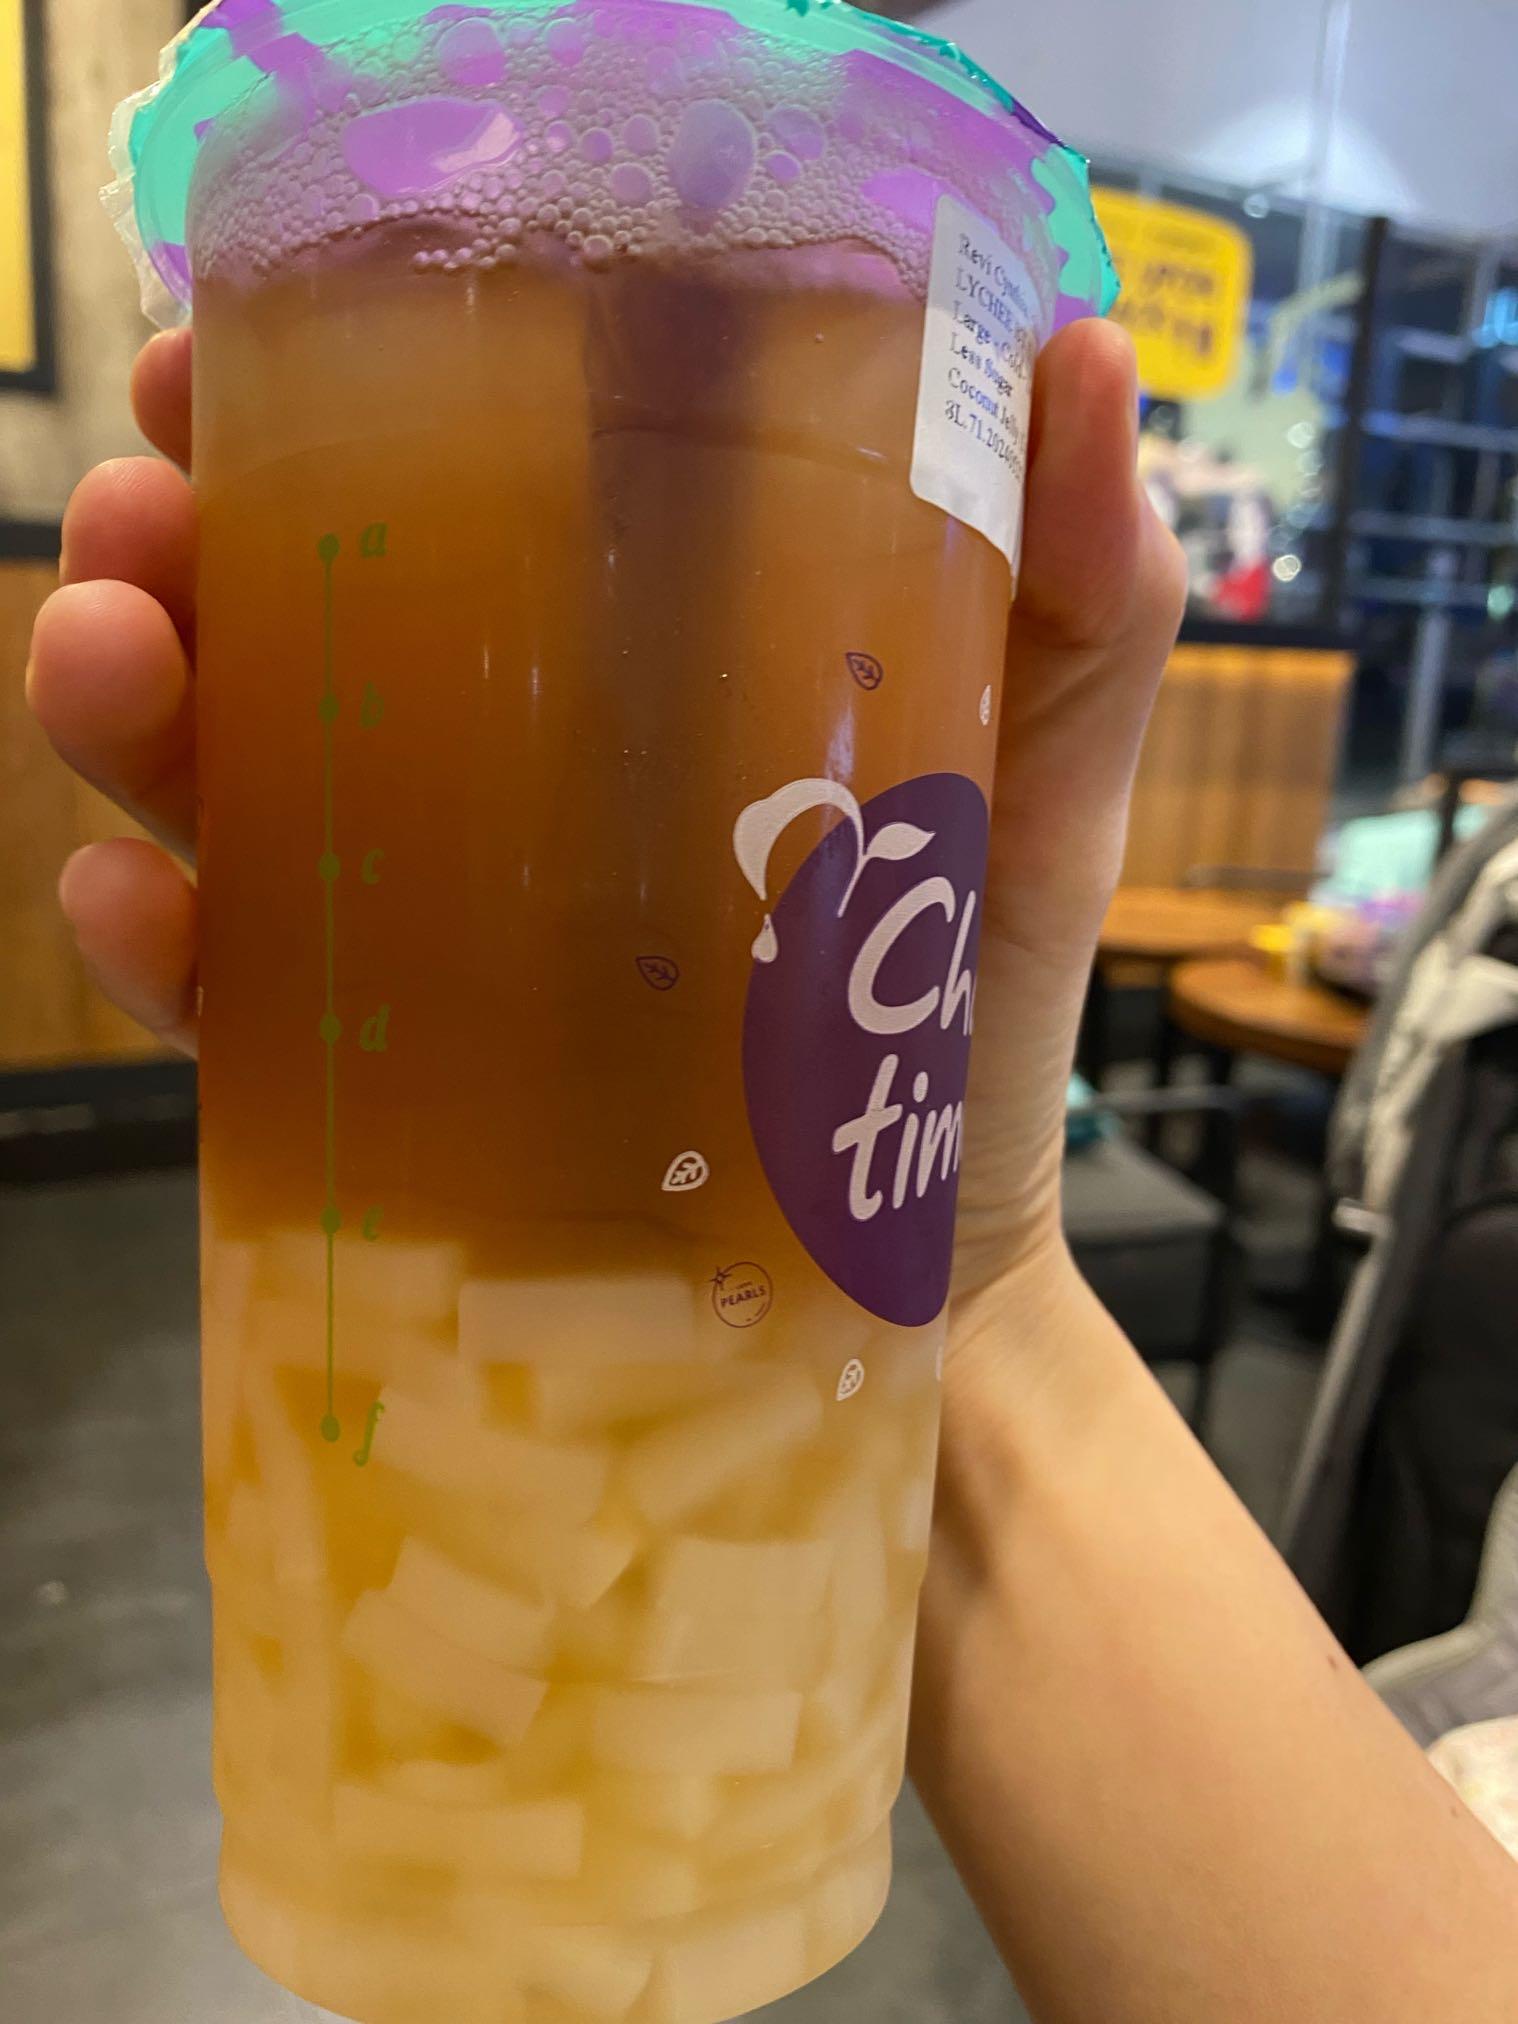 Chatime - The Breeze review